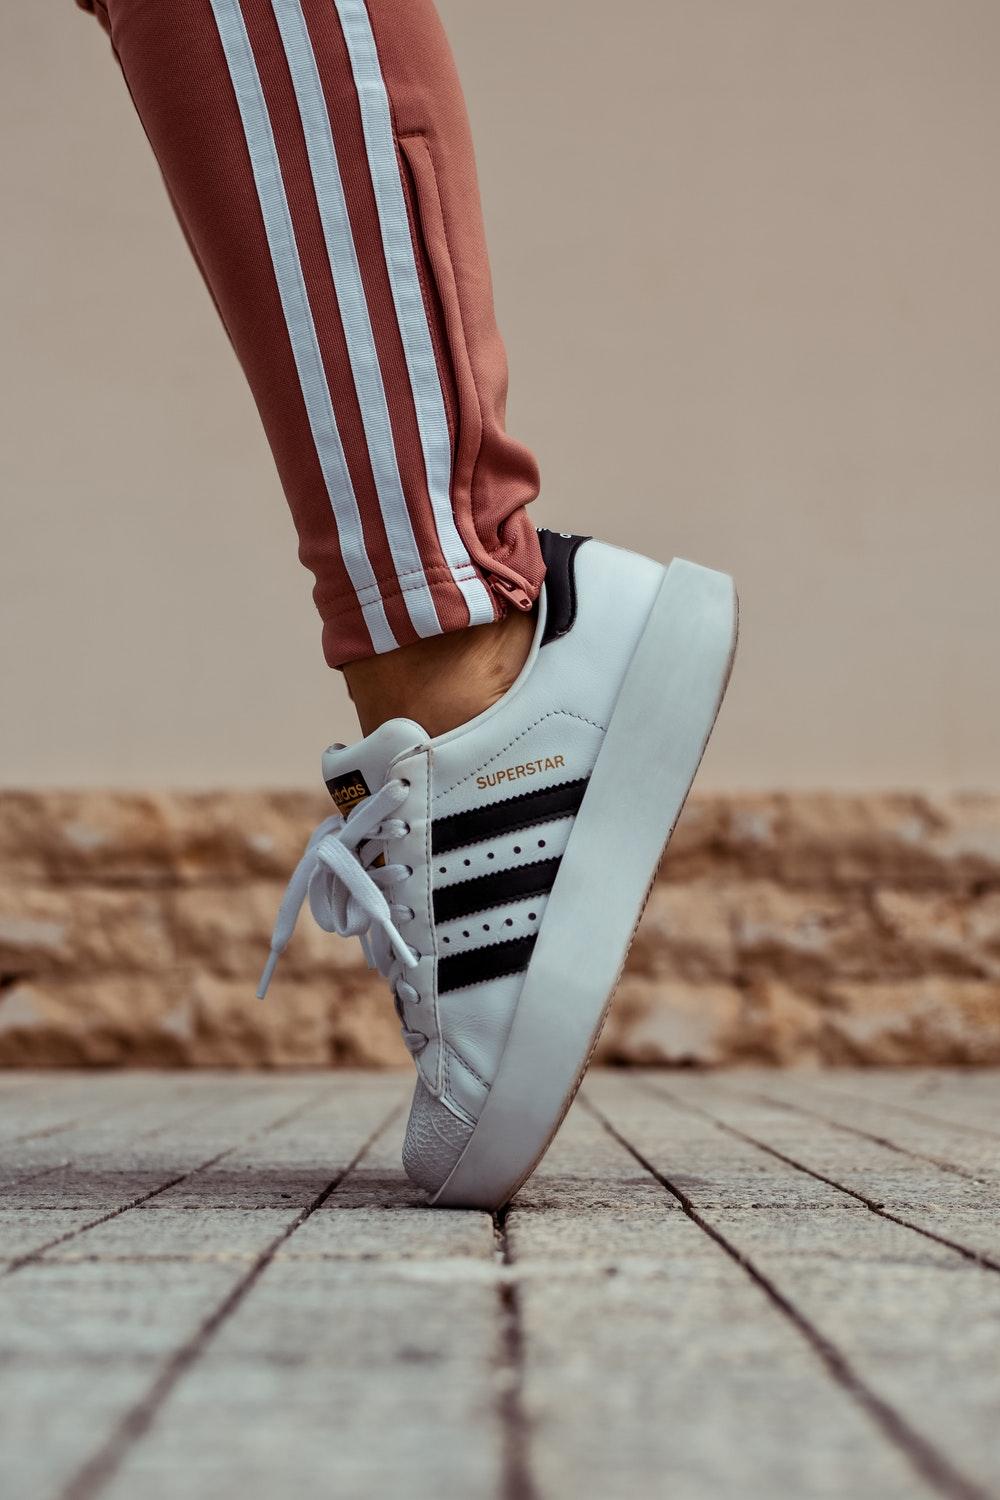 Adidas Picture. Download Free Image